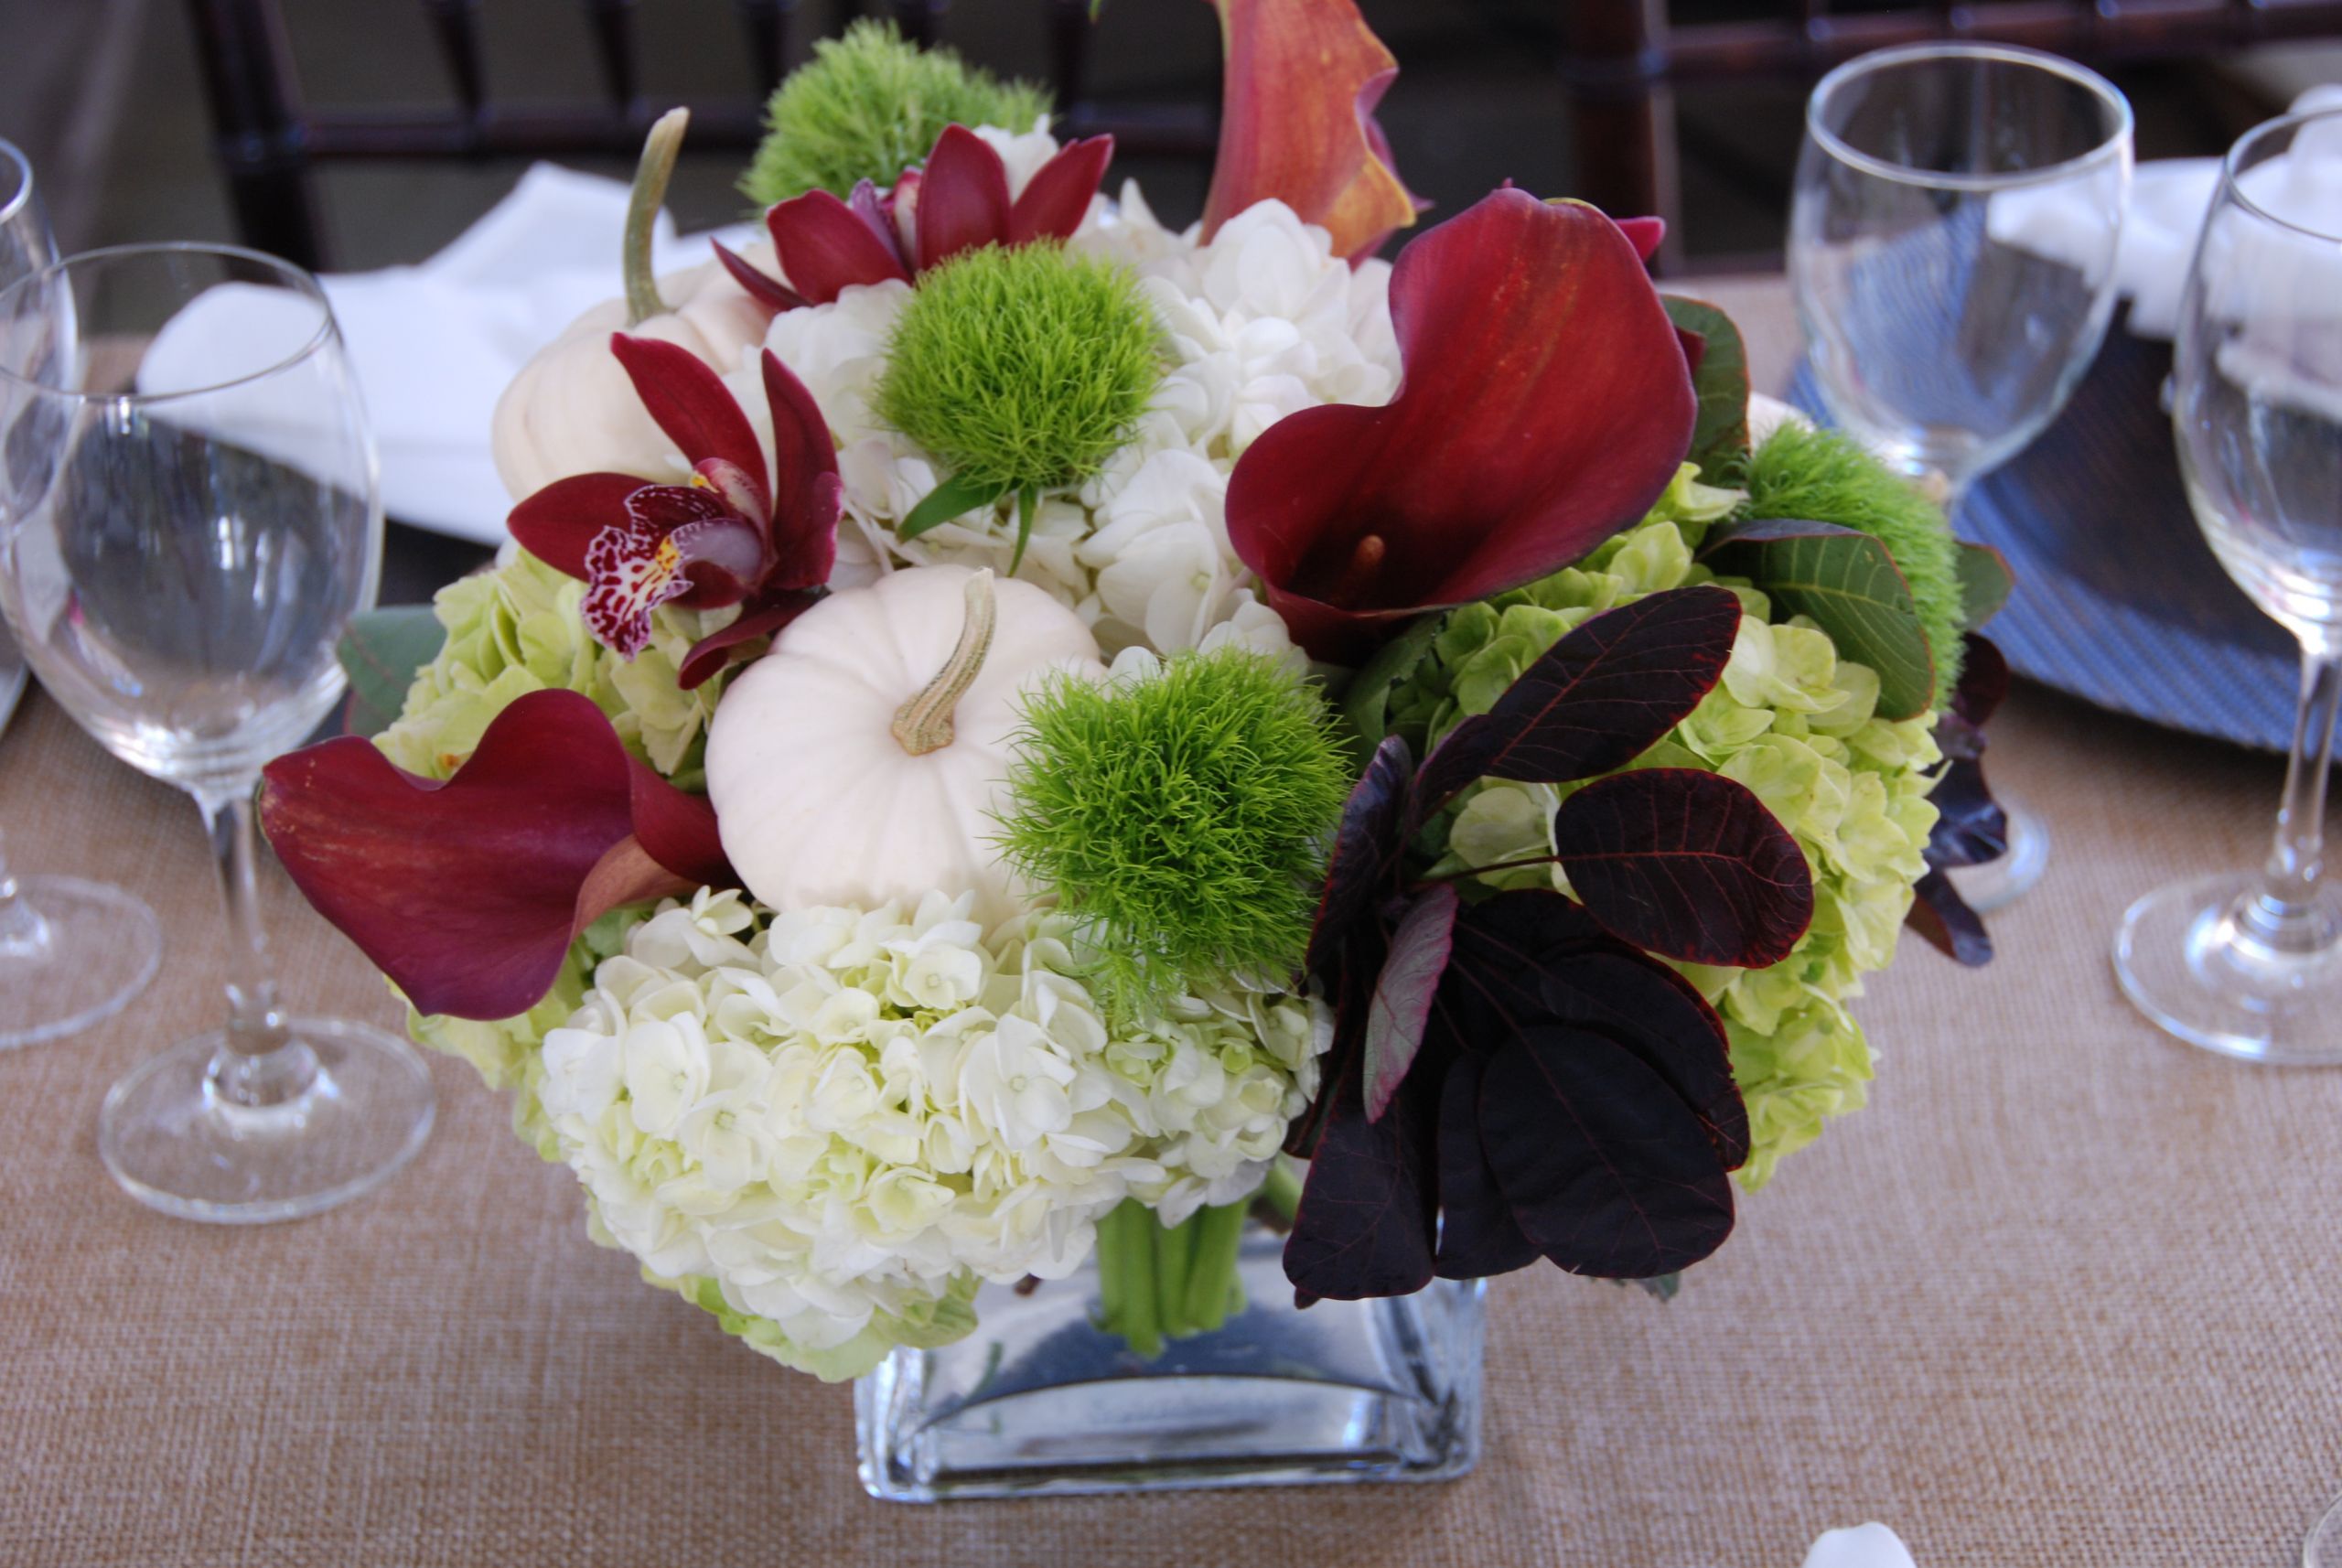 Centerpiece Ideas For Dinner Party
 Fall Dinner Party – Centerpieces